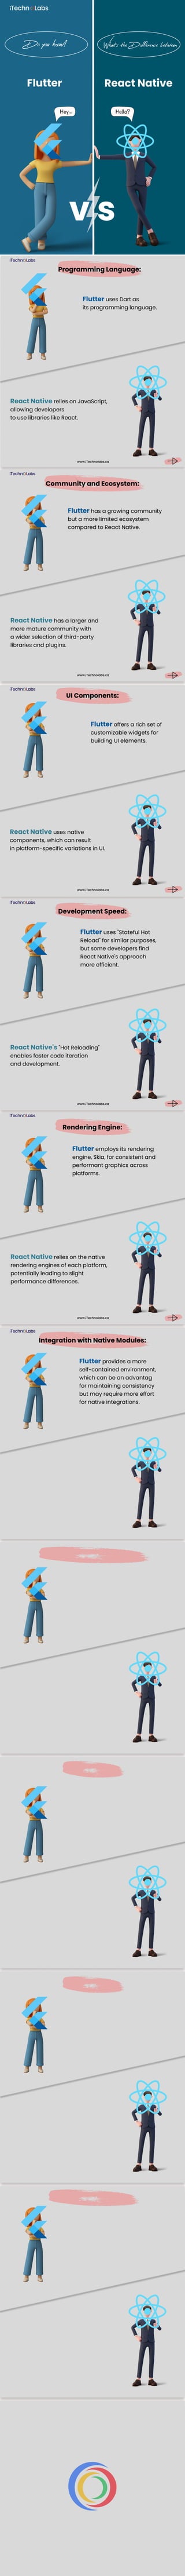 Flutter uses Dart as 

its programming language.
React Native relies on JavaScript, 

allowing developers

to use libraries like React.
Flutter offers a rich set of 

customizable widgets for

building UI elements.
React Native uses native 

components, which can result 

in platform-specific variations in UI.
Flutter has a growing community

but a more limited ecosystem 

compared to React Native.
React Native has a larger and 

more mature community with

a wider selection of third-party 

libraries and plugins.
Flutter uses "Stateful Hot 

Reload" for similar purposes,

but some developers find 

React Native's approach

more efficient.
React Native's "Hot Reloading" 

enables faster code iteration 

and development.
Flutter employs its rendering 

engine, Skia, for consistent and

performant graphics across

platforms.
React Native relies on the native

rendering engines of each platform,

potentially leading to slight 

performance differences.
Flutter provides a more

self-contained environment, 

which can be an advantag

for maintaining consistency

but may require more effort 

for native integrations.
React Native excels at integrating 

with existing native modules, 

making it suitable for projects 

requiring extensive native code

integration.
Flutter follows a "widget-first" 

approach, where everything 

is a widget, simplifying the

creation of complex UI

structures.
React Native focuses on a 

component-based hierarchy,

emphasizing the use of 

componentsto build user

interfaces.
Flutter often delivers

smoother animations

and complex graphics

due to its consistent 

rendering engine.
React Native's performance may

vary based on the usage of 

native components and 

third-party libraries.
Flutter often delivers smoother 

animations and complex

graphics due to its consistent 

rendering engine.
React Native's performance may

vary based on the usage of

native components and

third-party libraries.
Flutter provides a more 

integrated development

environment with tools like

Flutter Inspector.
React Native relies on a combination 

of tools, including the React Native

CLI and third-party IDEs like Visual

Studio Code.
And for amazing stuff you can follow iTechnolabs
business@iTechnolabs.ca www.iTechnolabs.ca
References:
Flutter and React Native: 10 Most Important Differences You Must Know! 

Flutter and React Native: Difference Between Flutter and React Native

Hey... Hello?
Flutter
v s
React Native
www.iTechnolabs.ca
www.iTechnolabs.ca
www.iTechnolabs.ca
www.iTechnolabs.ca
www.iTechnolabs.ca
www.iTechnolabs.ca
www.iTechnolabs.ca
www.iTechnolabs.ca
www.iTechnolabs.ca
www.iTechnolabs.ca
Do you know? What's the Difference between
Programming Language:
Community and Ecosystem:
UI Components:
Development Speed:
Rendering Engine:
Integration with Native Modules:
Development Philosophy:
File Size:
Performance:
Development Environment:
 